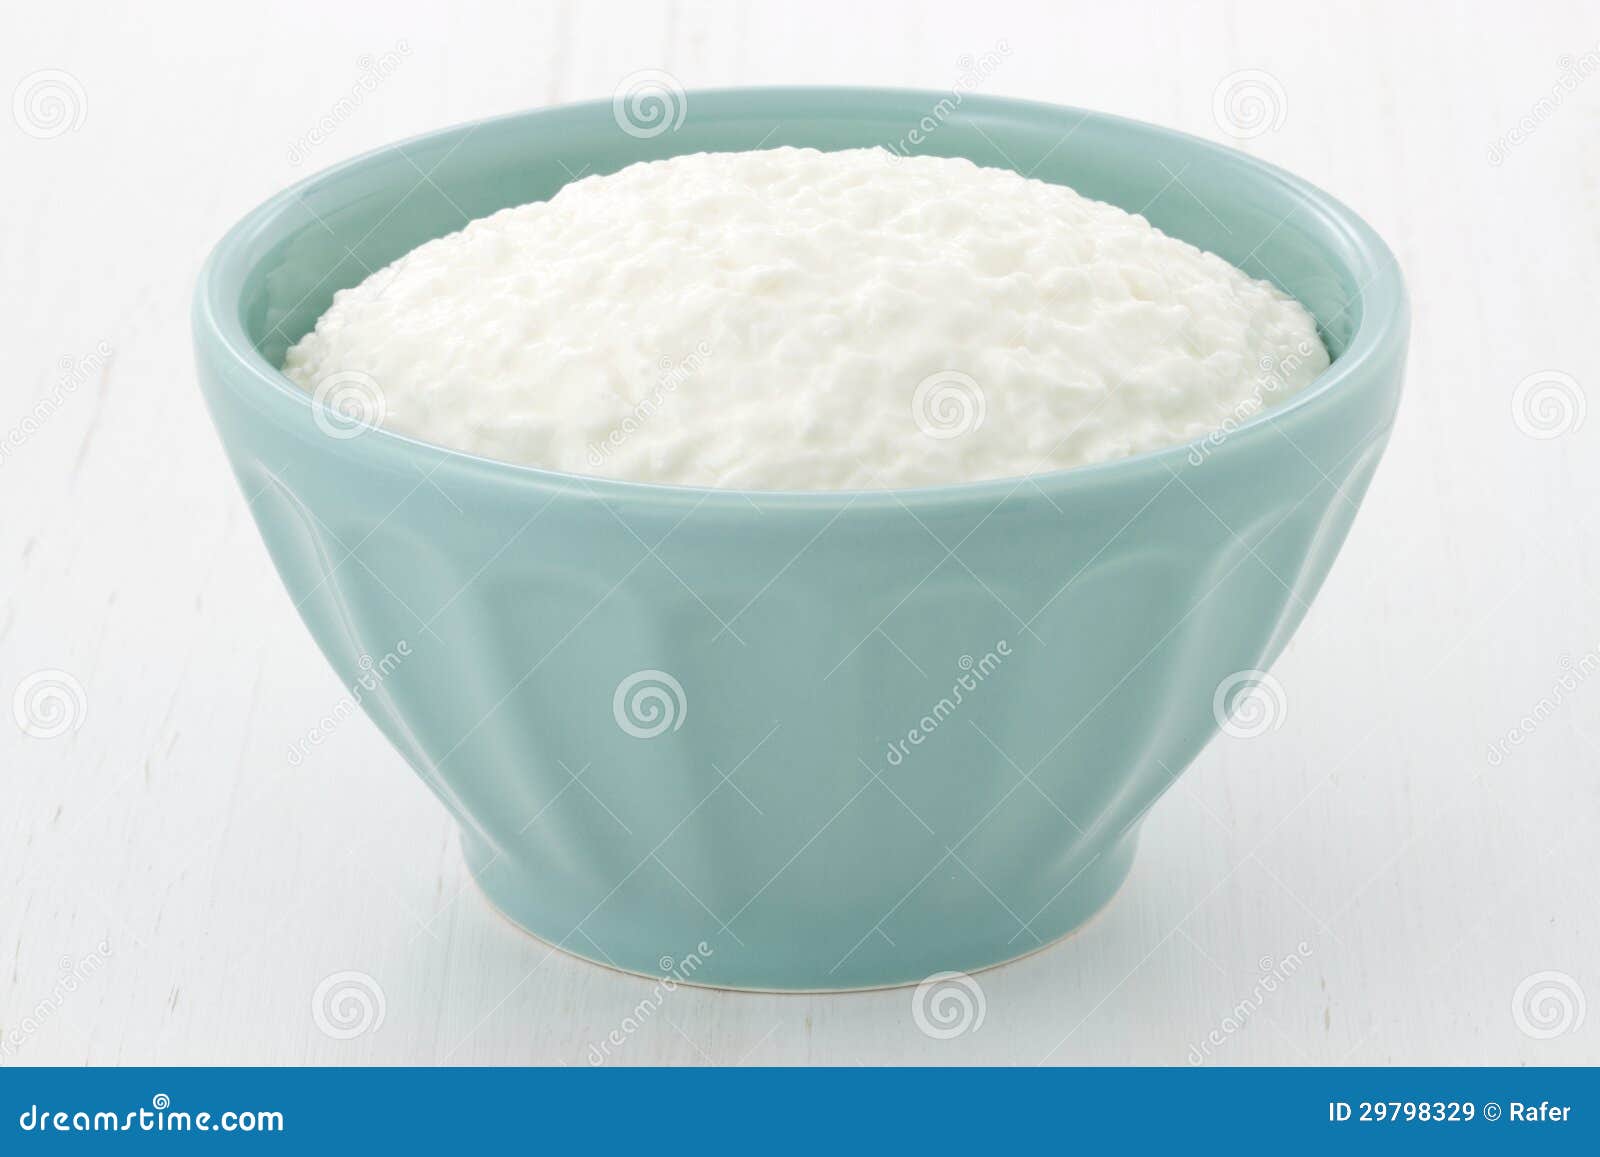 Lose weight fast » Cottage cheese for weight loss